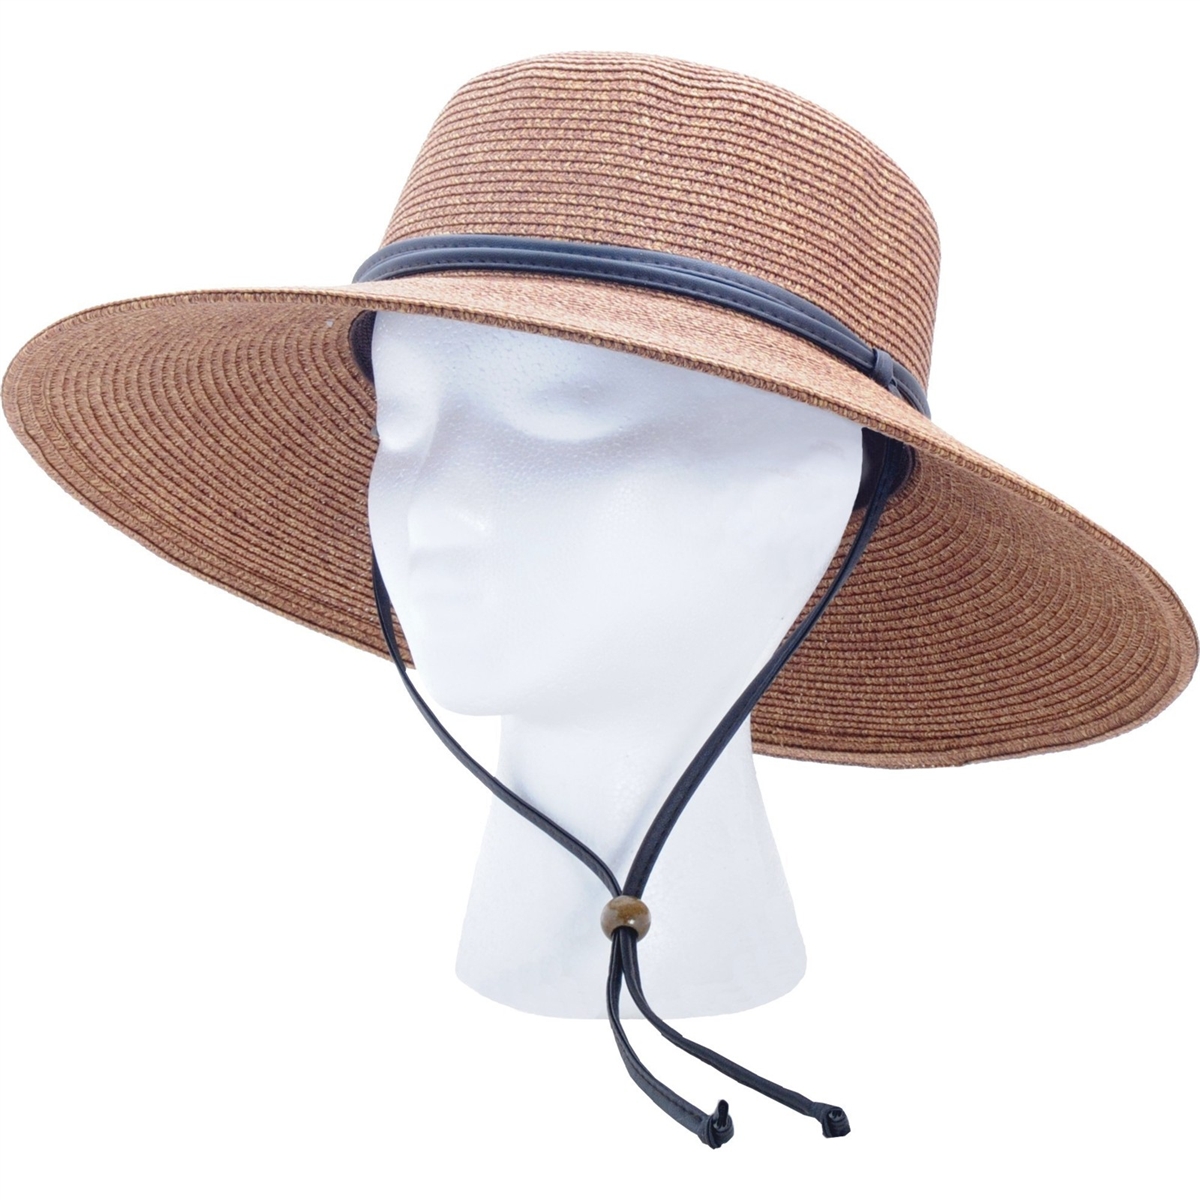 Extra Large Brim Sun Hats Summer Straw Hats for Women Wide Brim Floppy  Panama Hat Beach Hat with Wind Lanyard